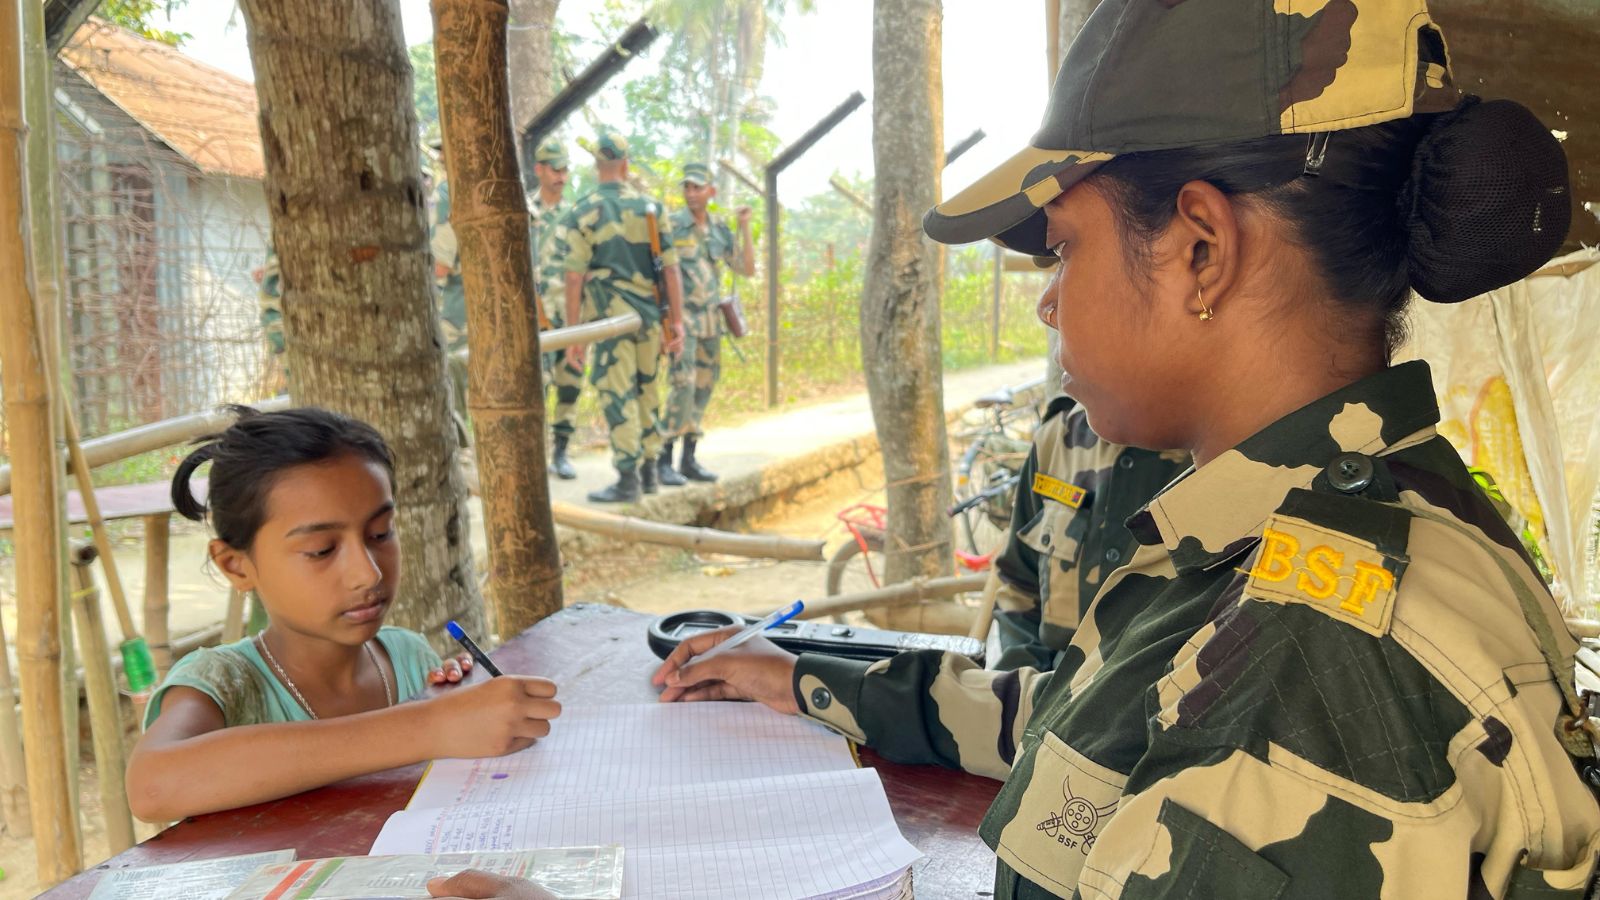 Indian children have to register themselves to enter as well. (Express photo)